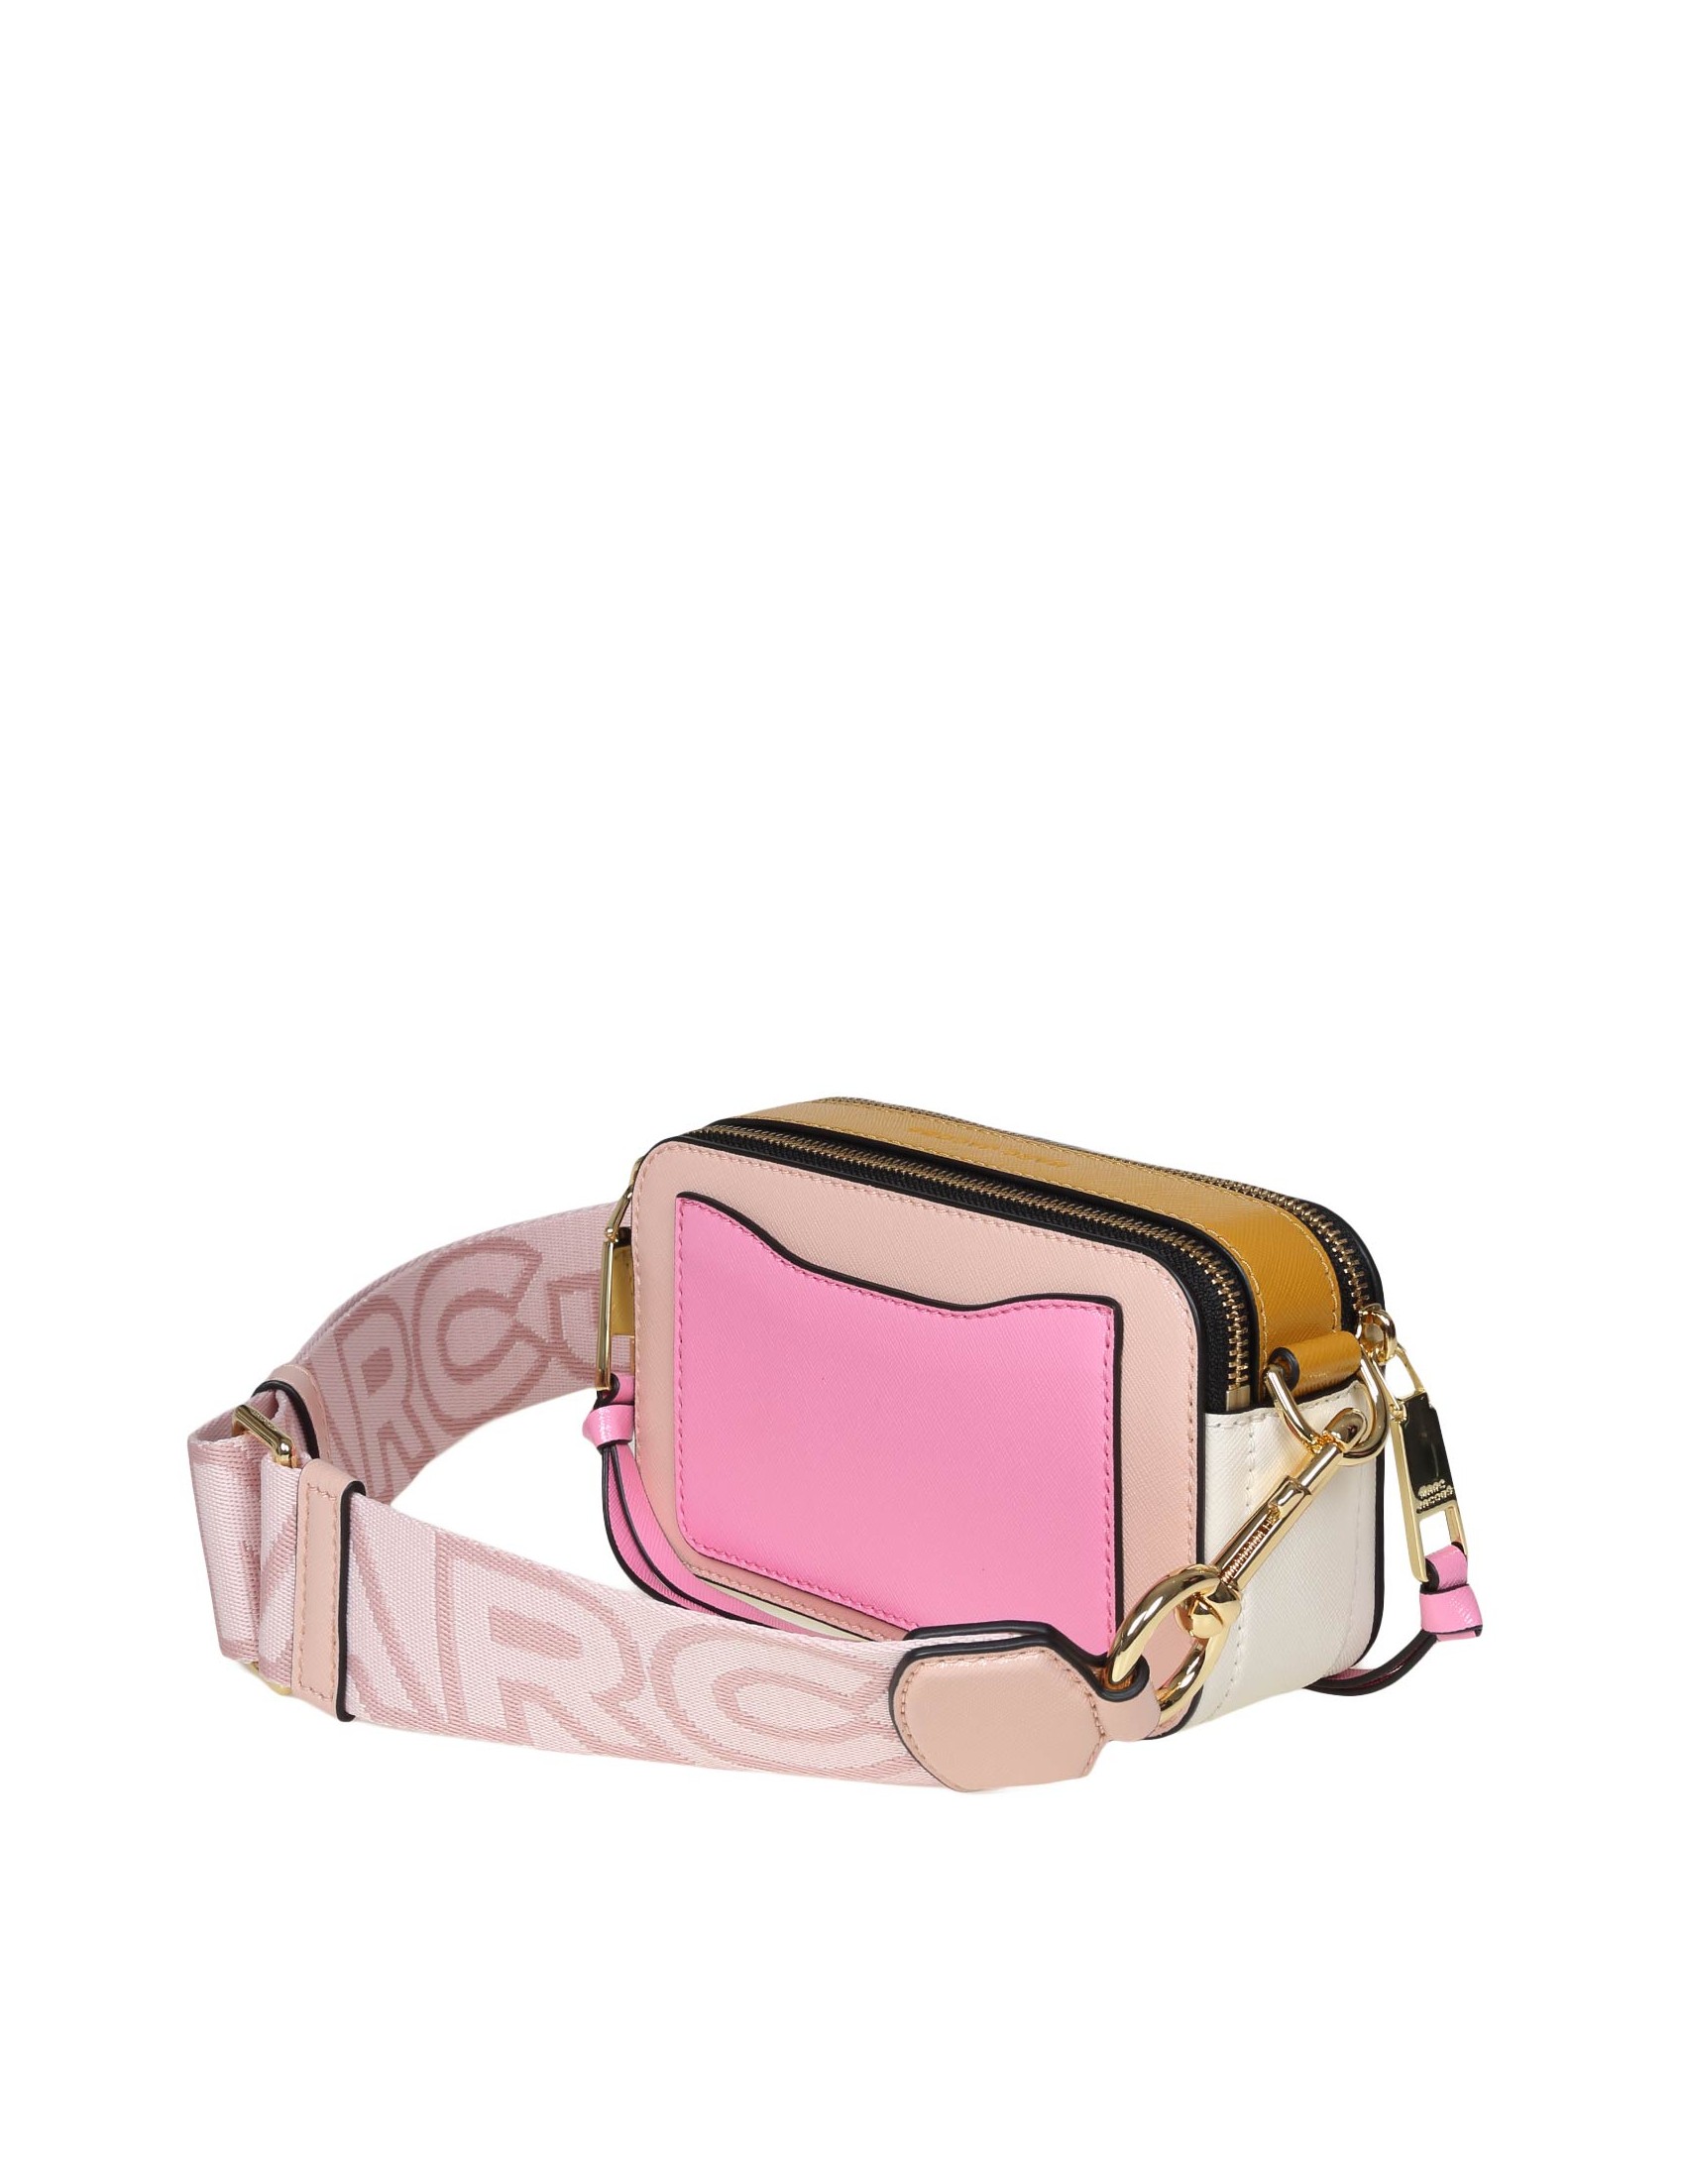 Snapshot leather handbag Marc Jacobs Pink in Leather - 24472413